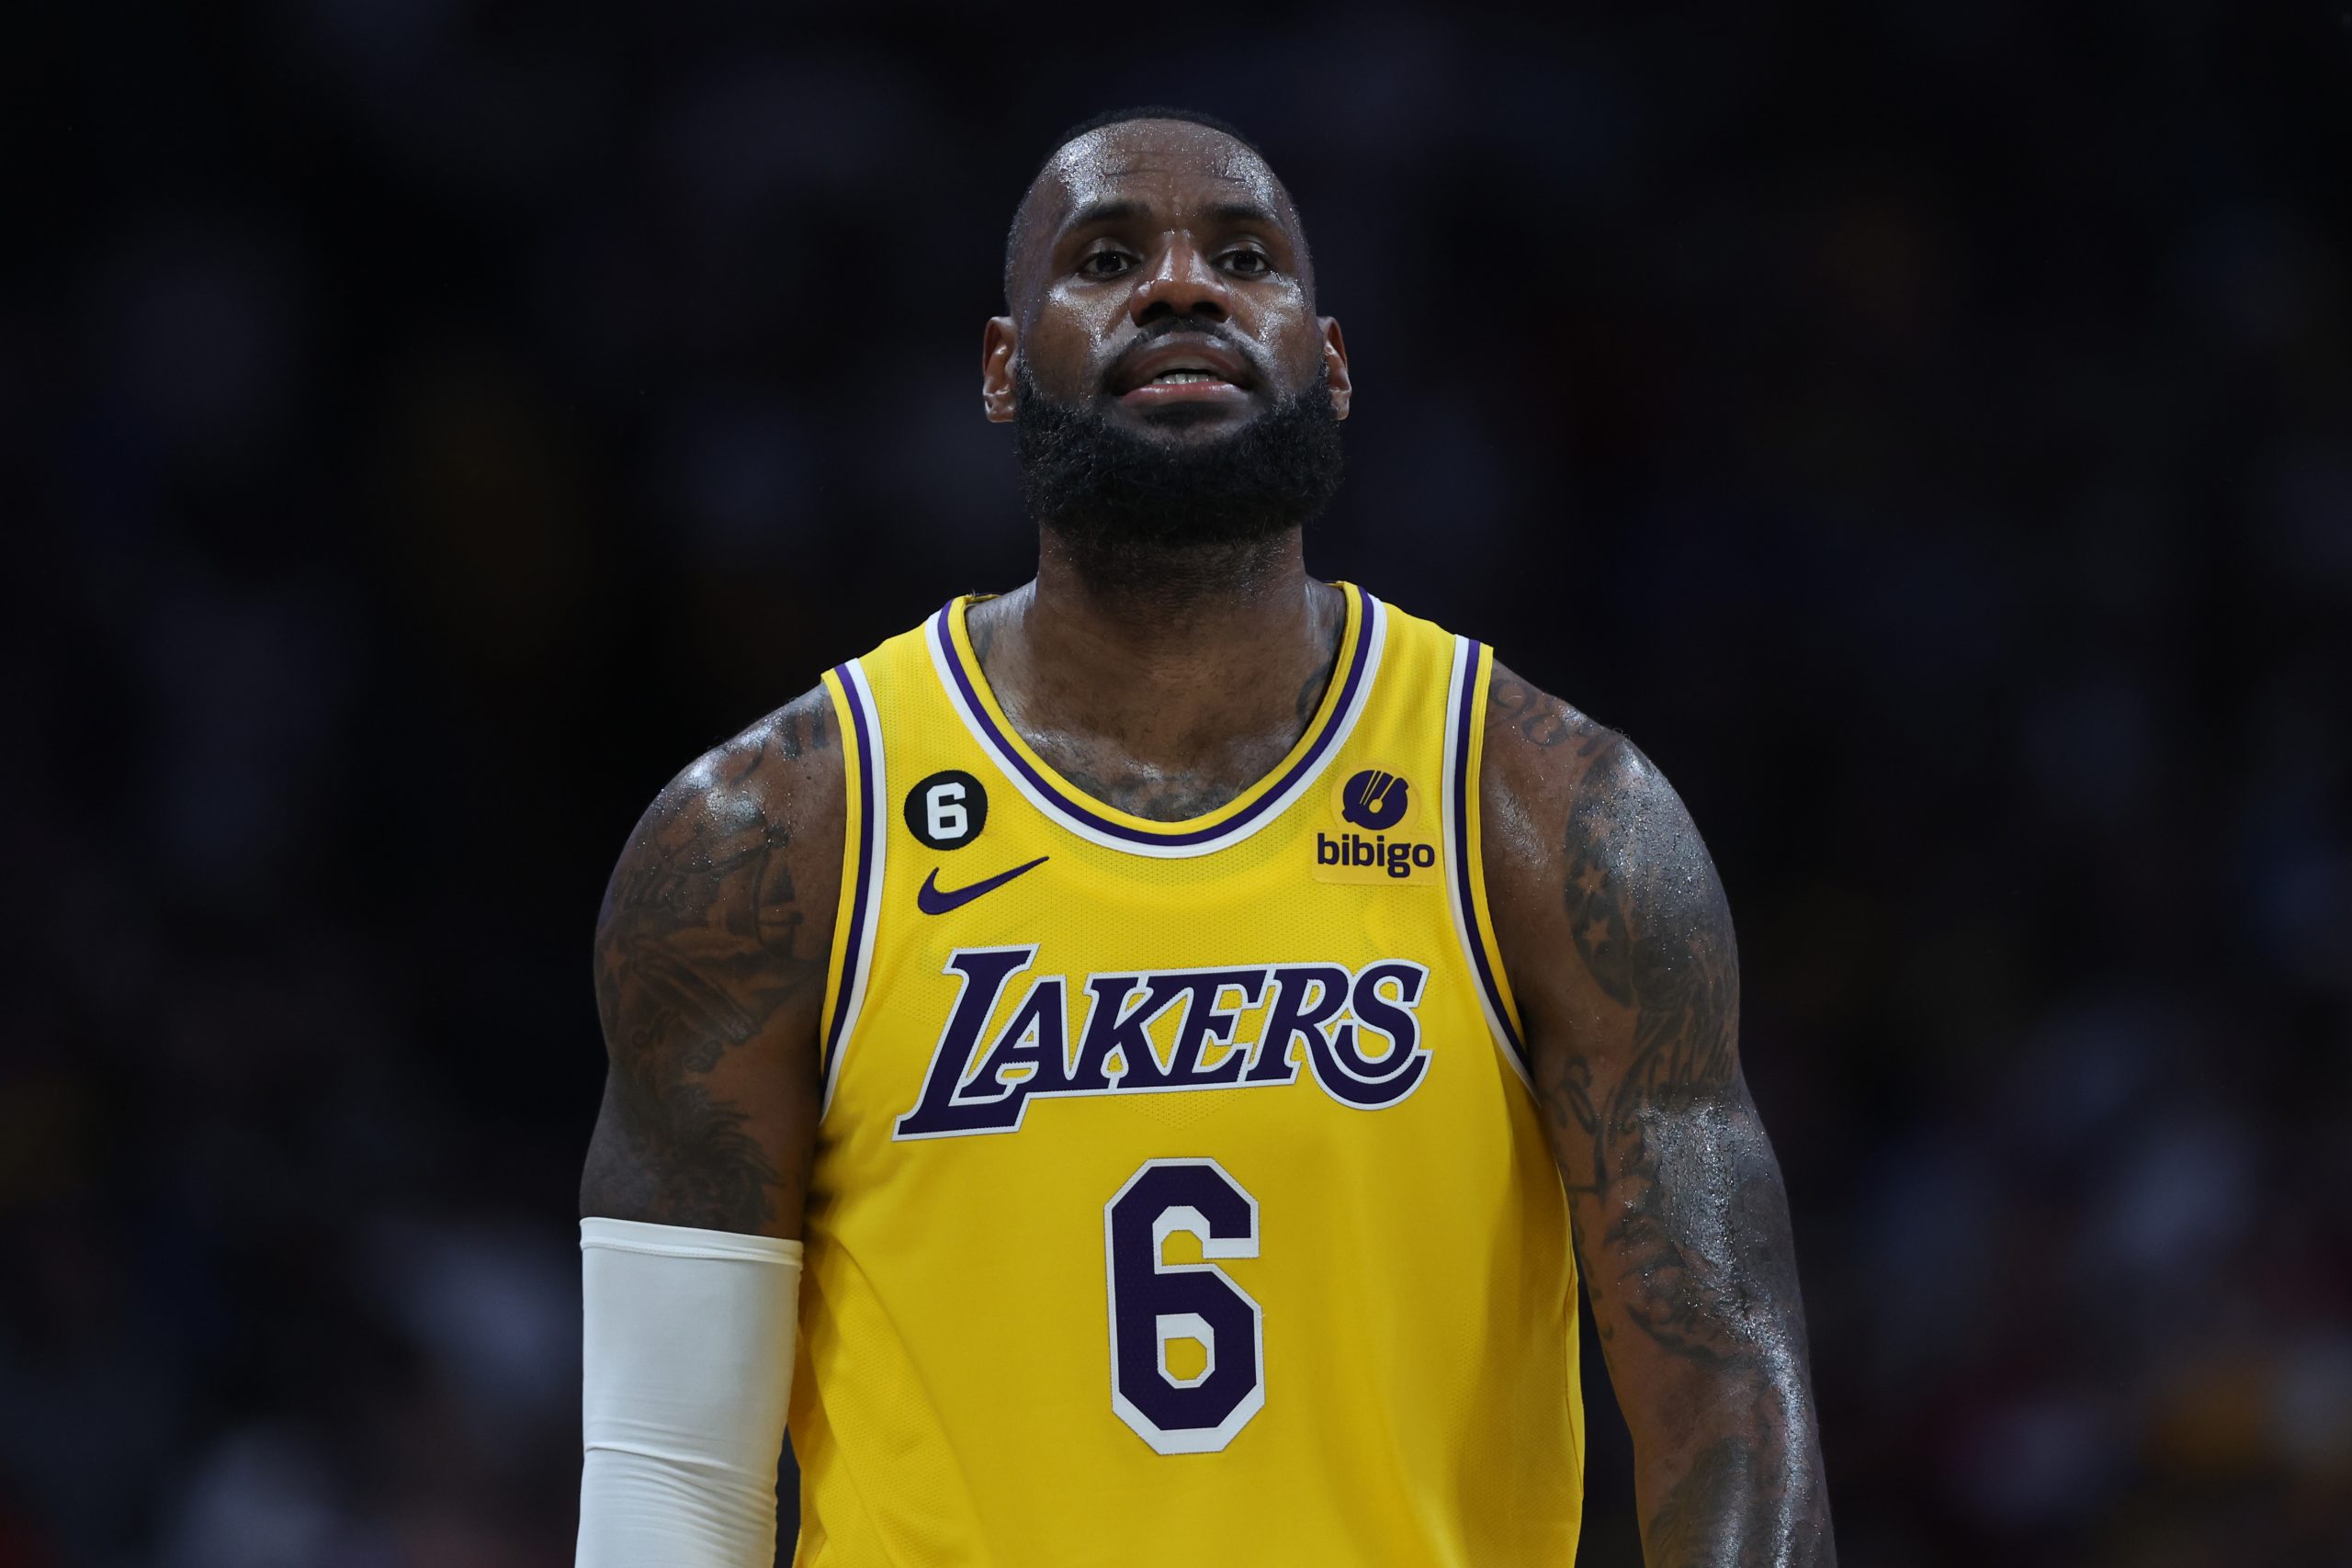 DENVER, COLORADO - MAY 18: LeBron James #6 of the Los Angeles Lakers reacts after losing to the Den...